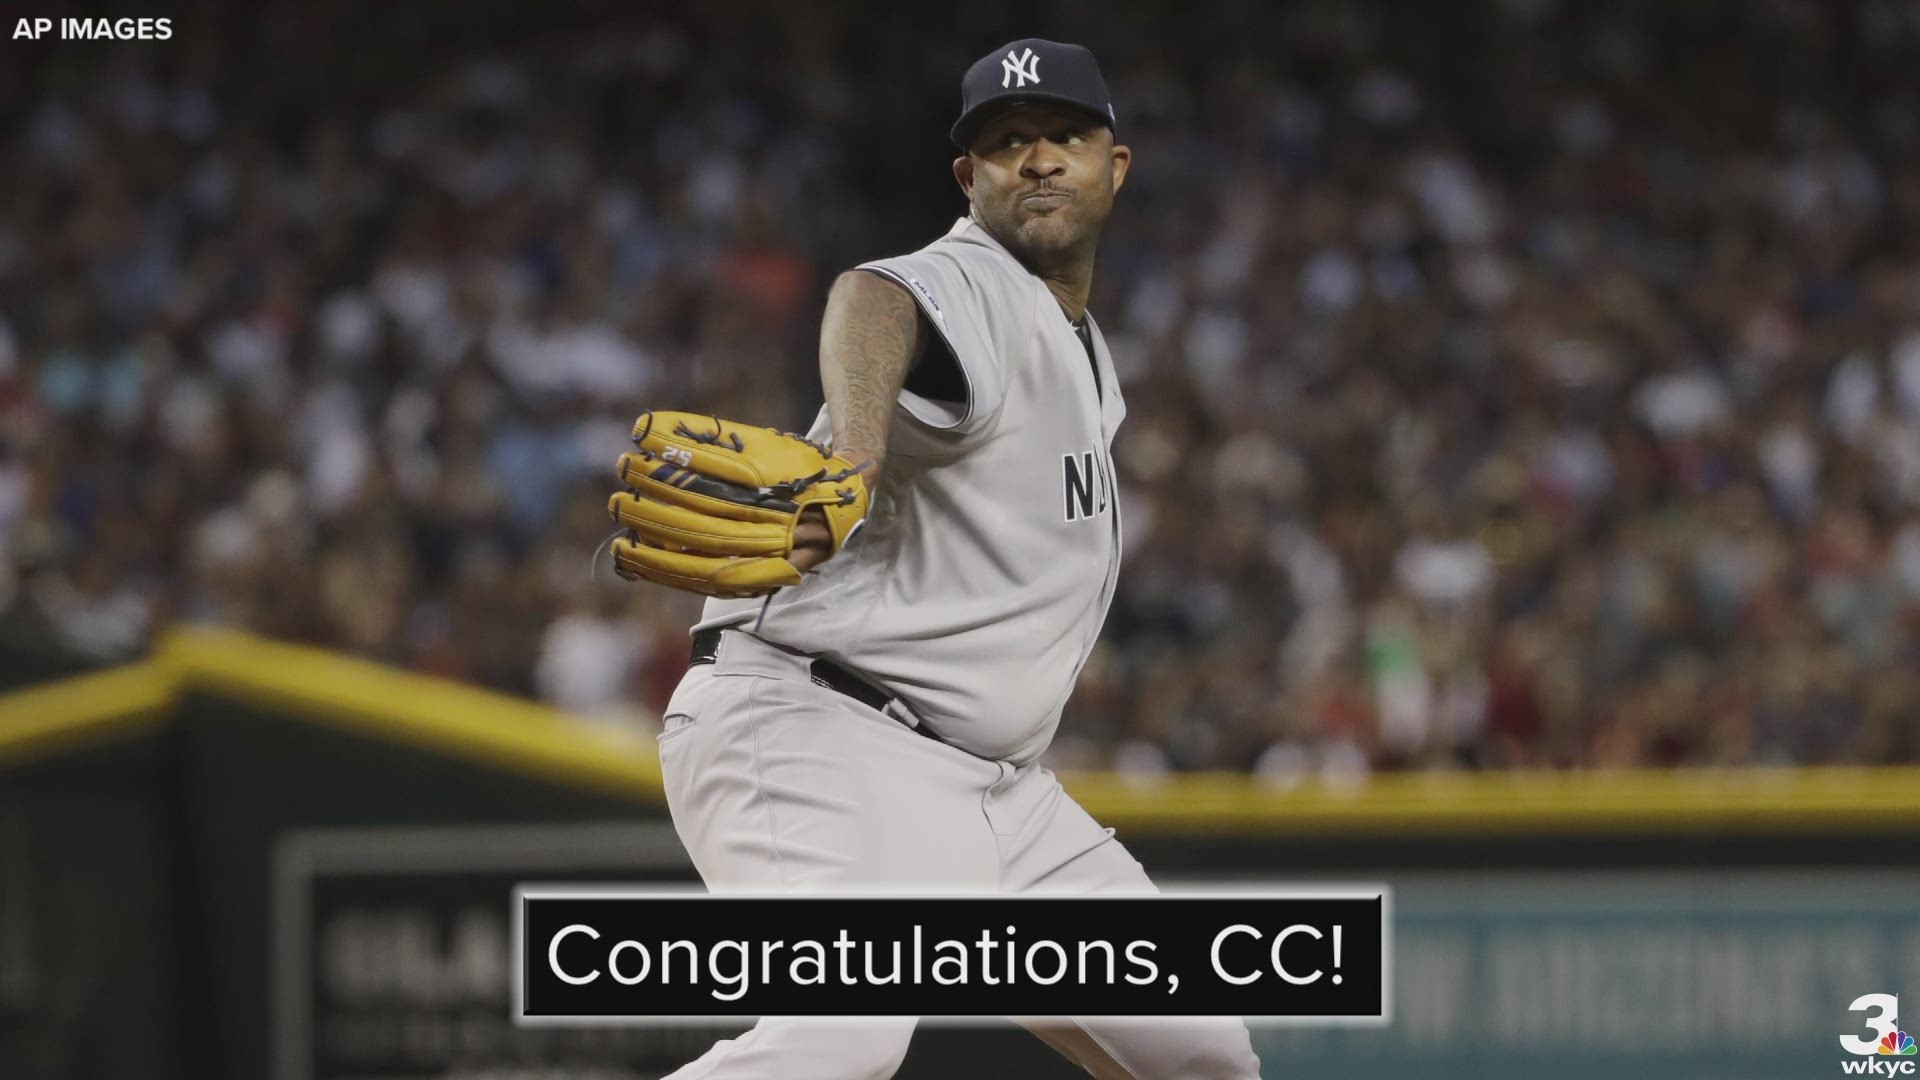 Former Indians All-Star CC Sabathia becomes 17th pitcher with